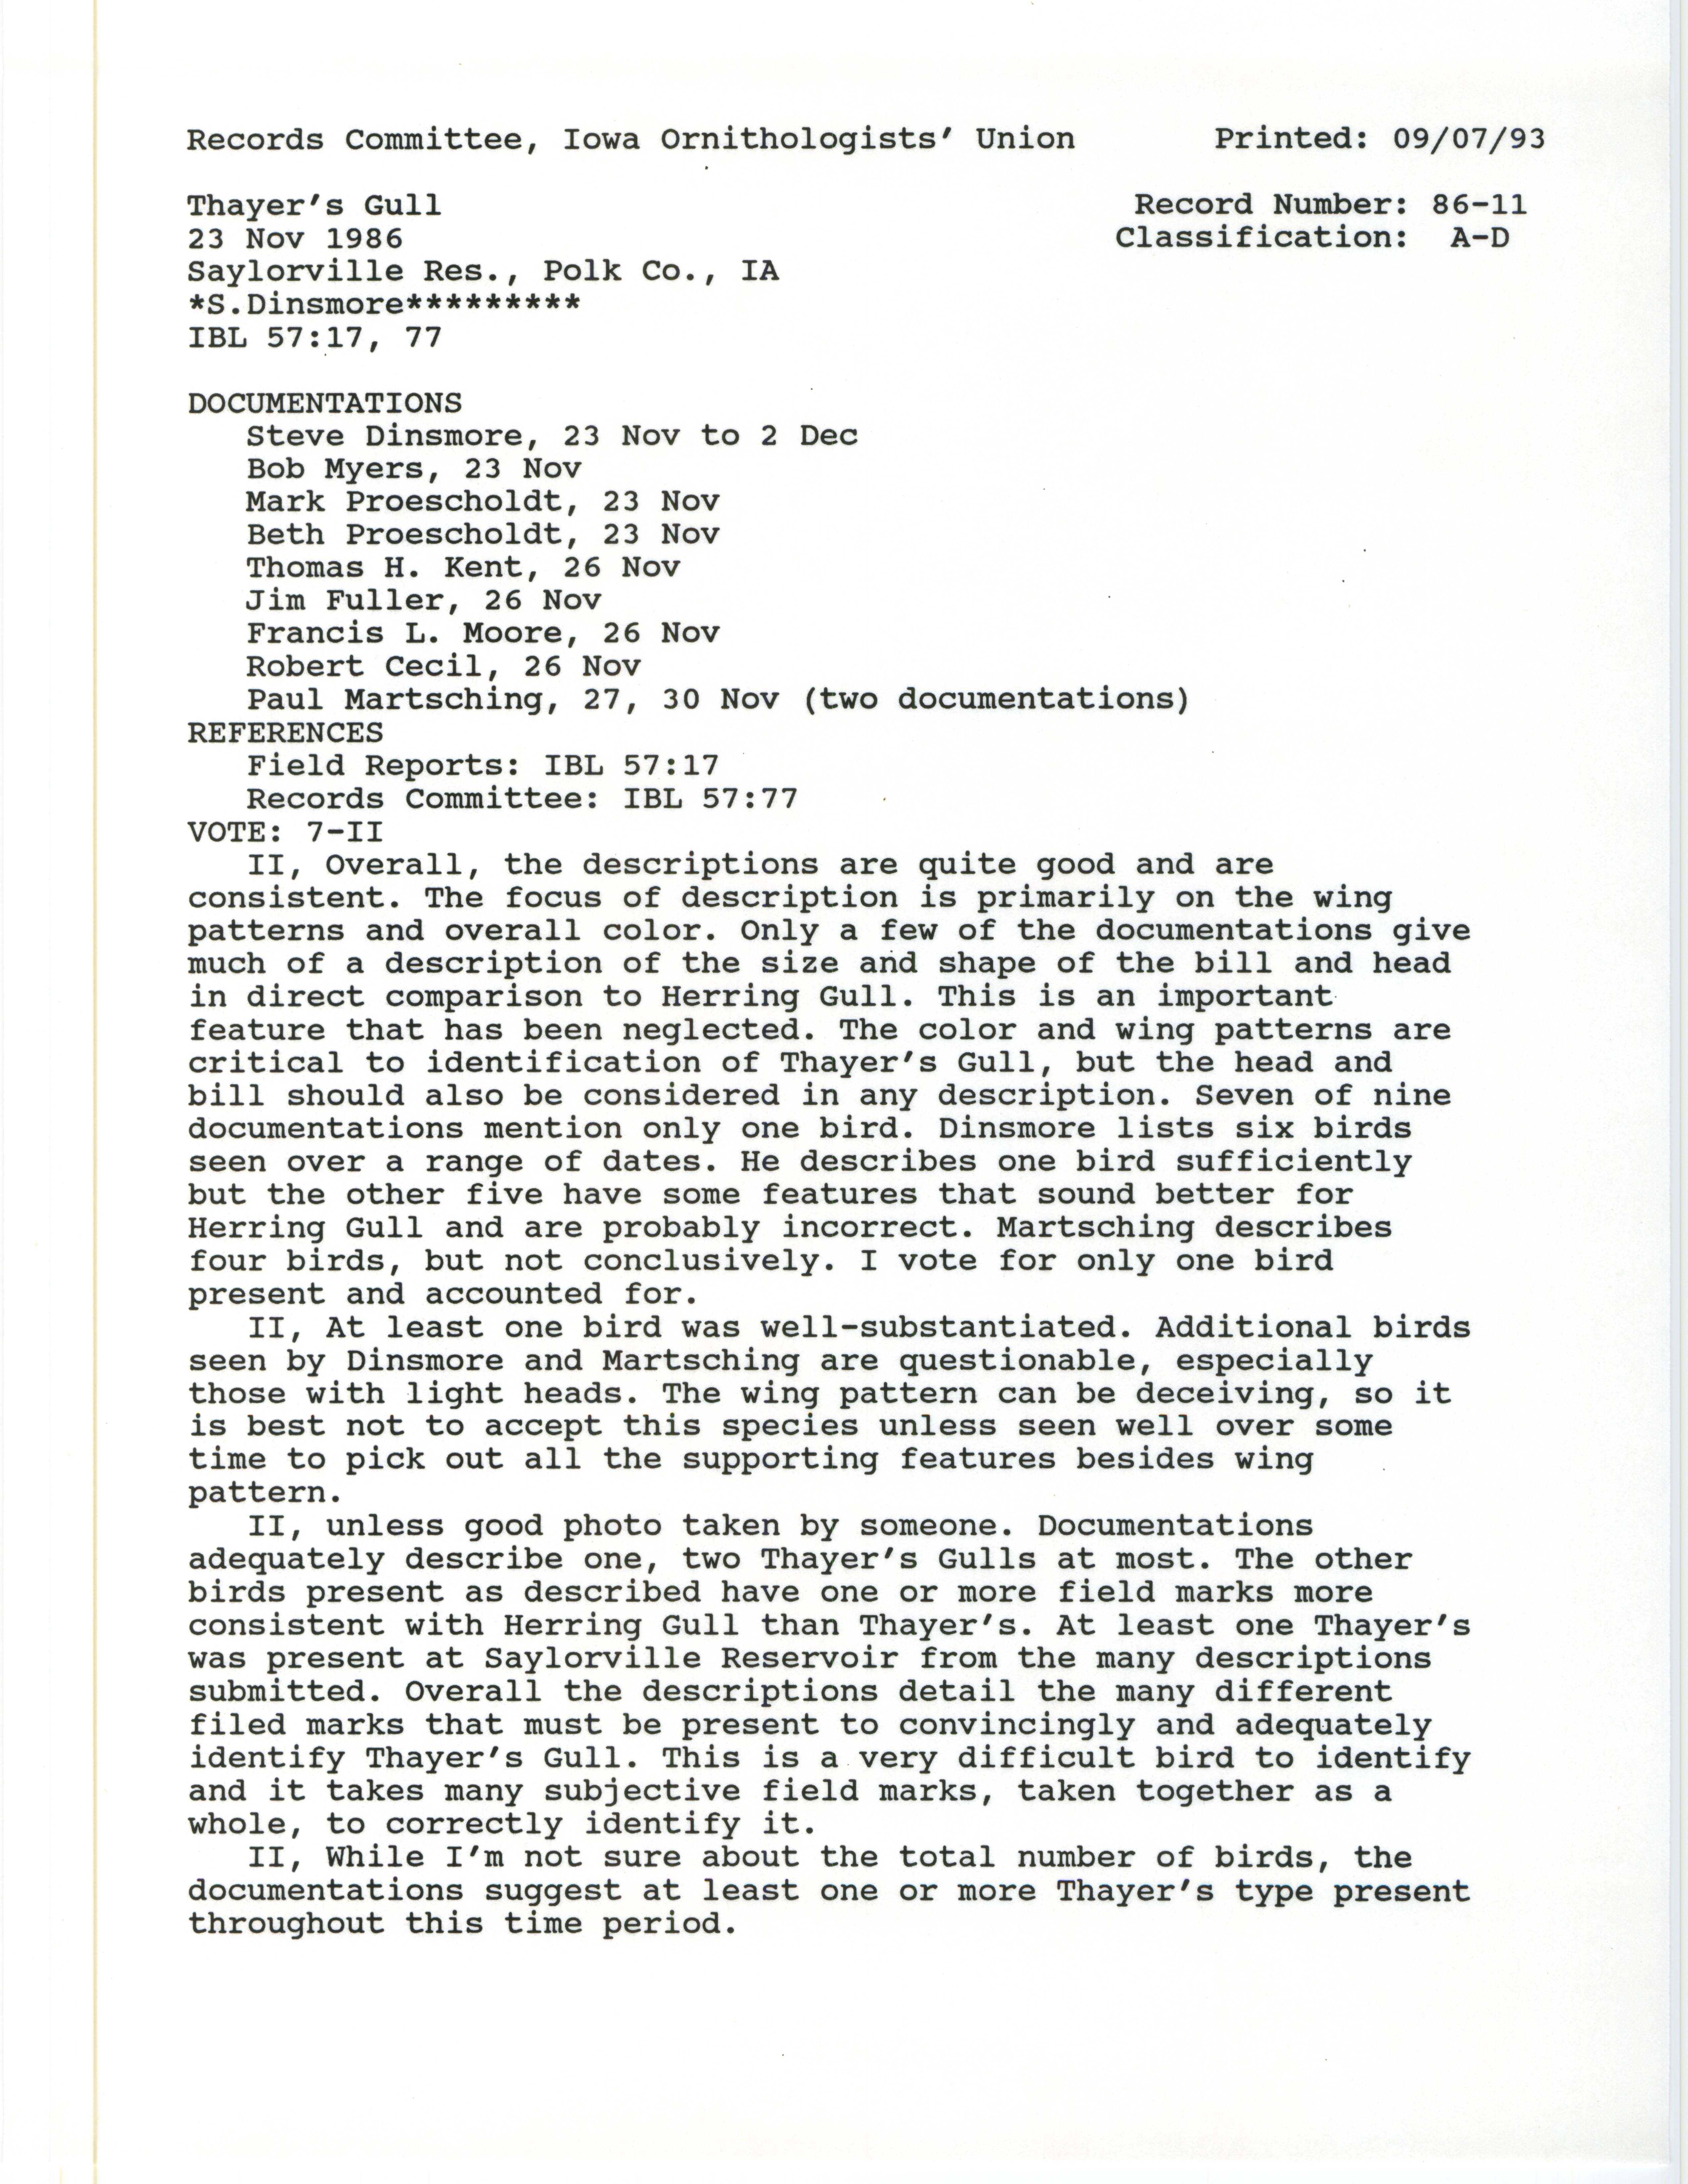 Records Committee review for rare bird sighting of Thayer's Gull near Oak Grove Beach and Saylorville Reservoir Dam, 1986